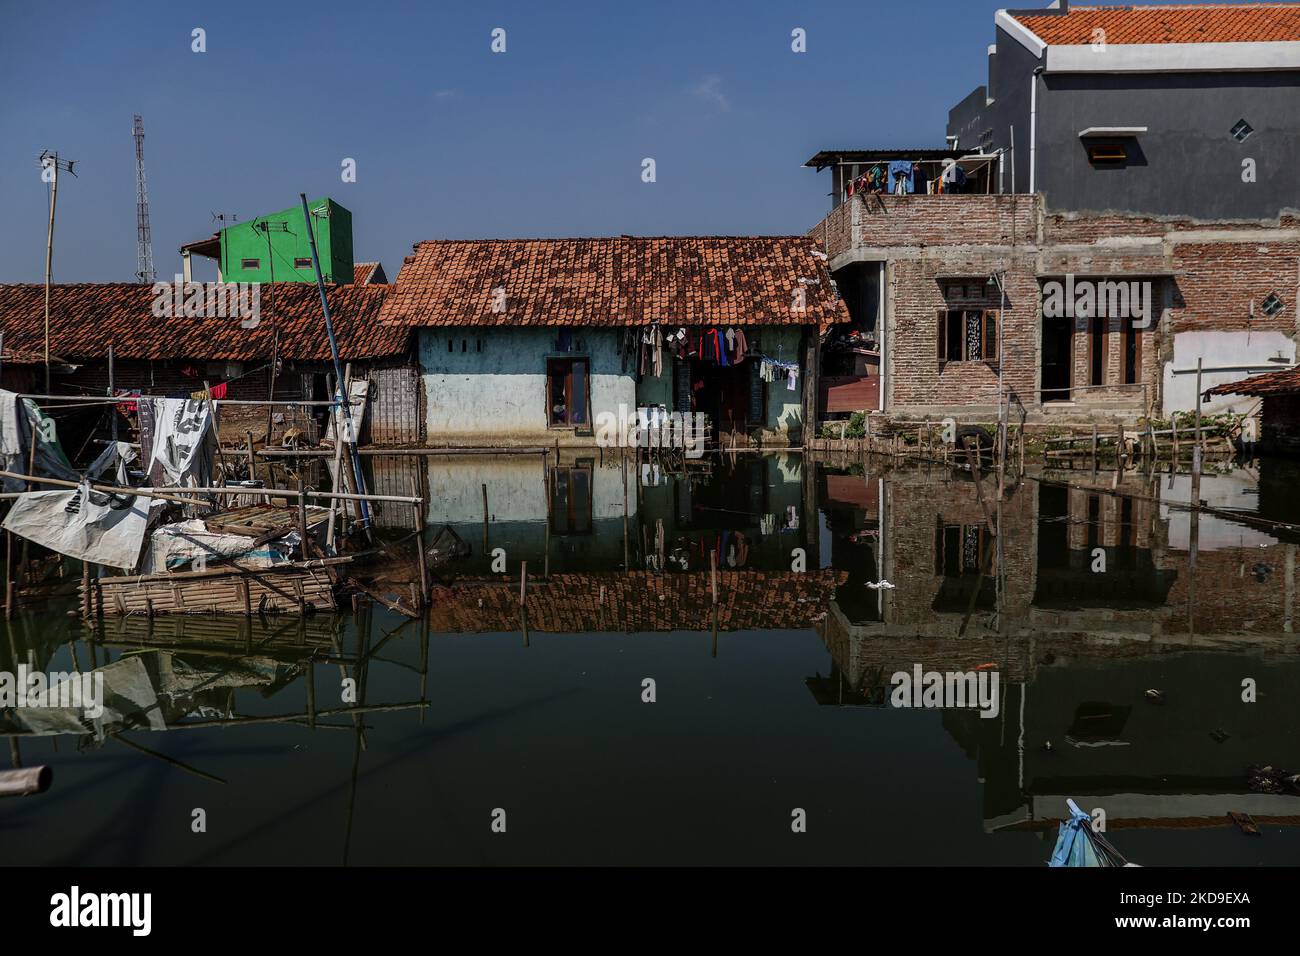 Homes surrounded by rising sea levels is seen at low-lying Jeruk Sari neighborhood in coastal Pekalongan, Central Java, Indonesia, June 5, 2021. An area in which almost every available space is used for batik production, with a high level of poverty, vulnerable to both rising sea levels and high river peak flows. They hangs and washes at a polluted river for process traditional Javanese textile called Batik. Batik is a traditional Indonesian method of using wax to resist water-based dyes to depict patterns and drawings on fabric. At the heart of the problem is Pekalongan’s overreliance on grou Stock Photo